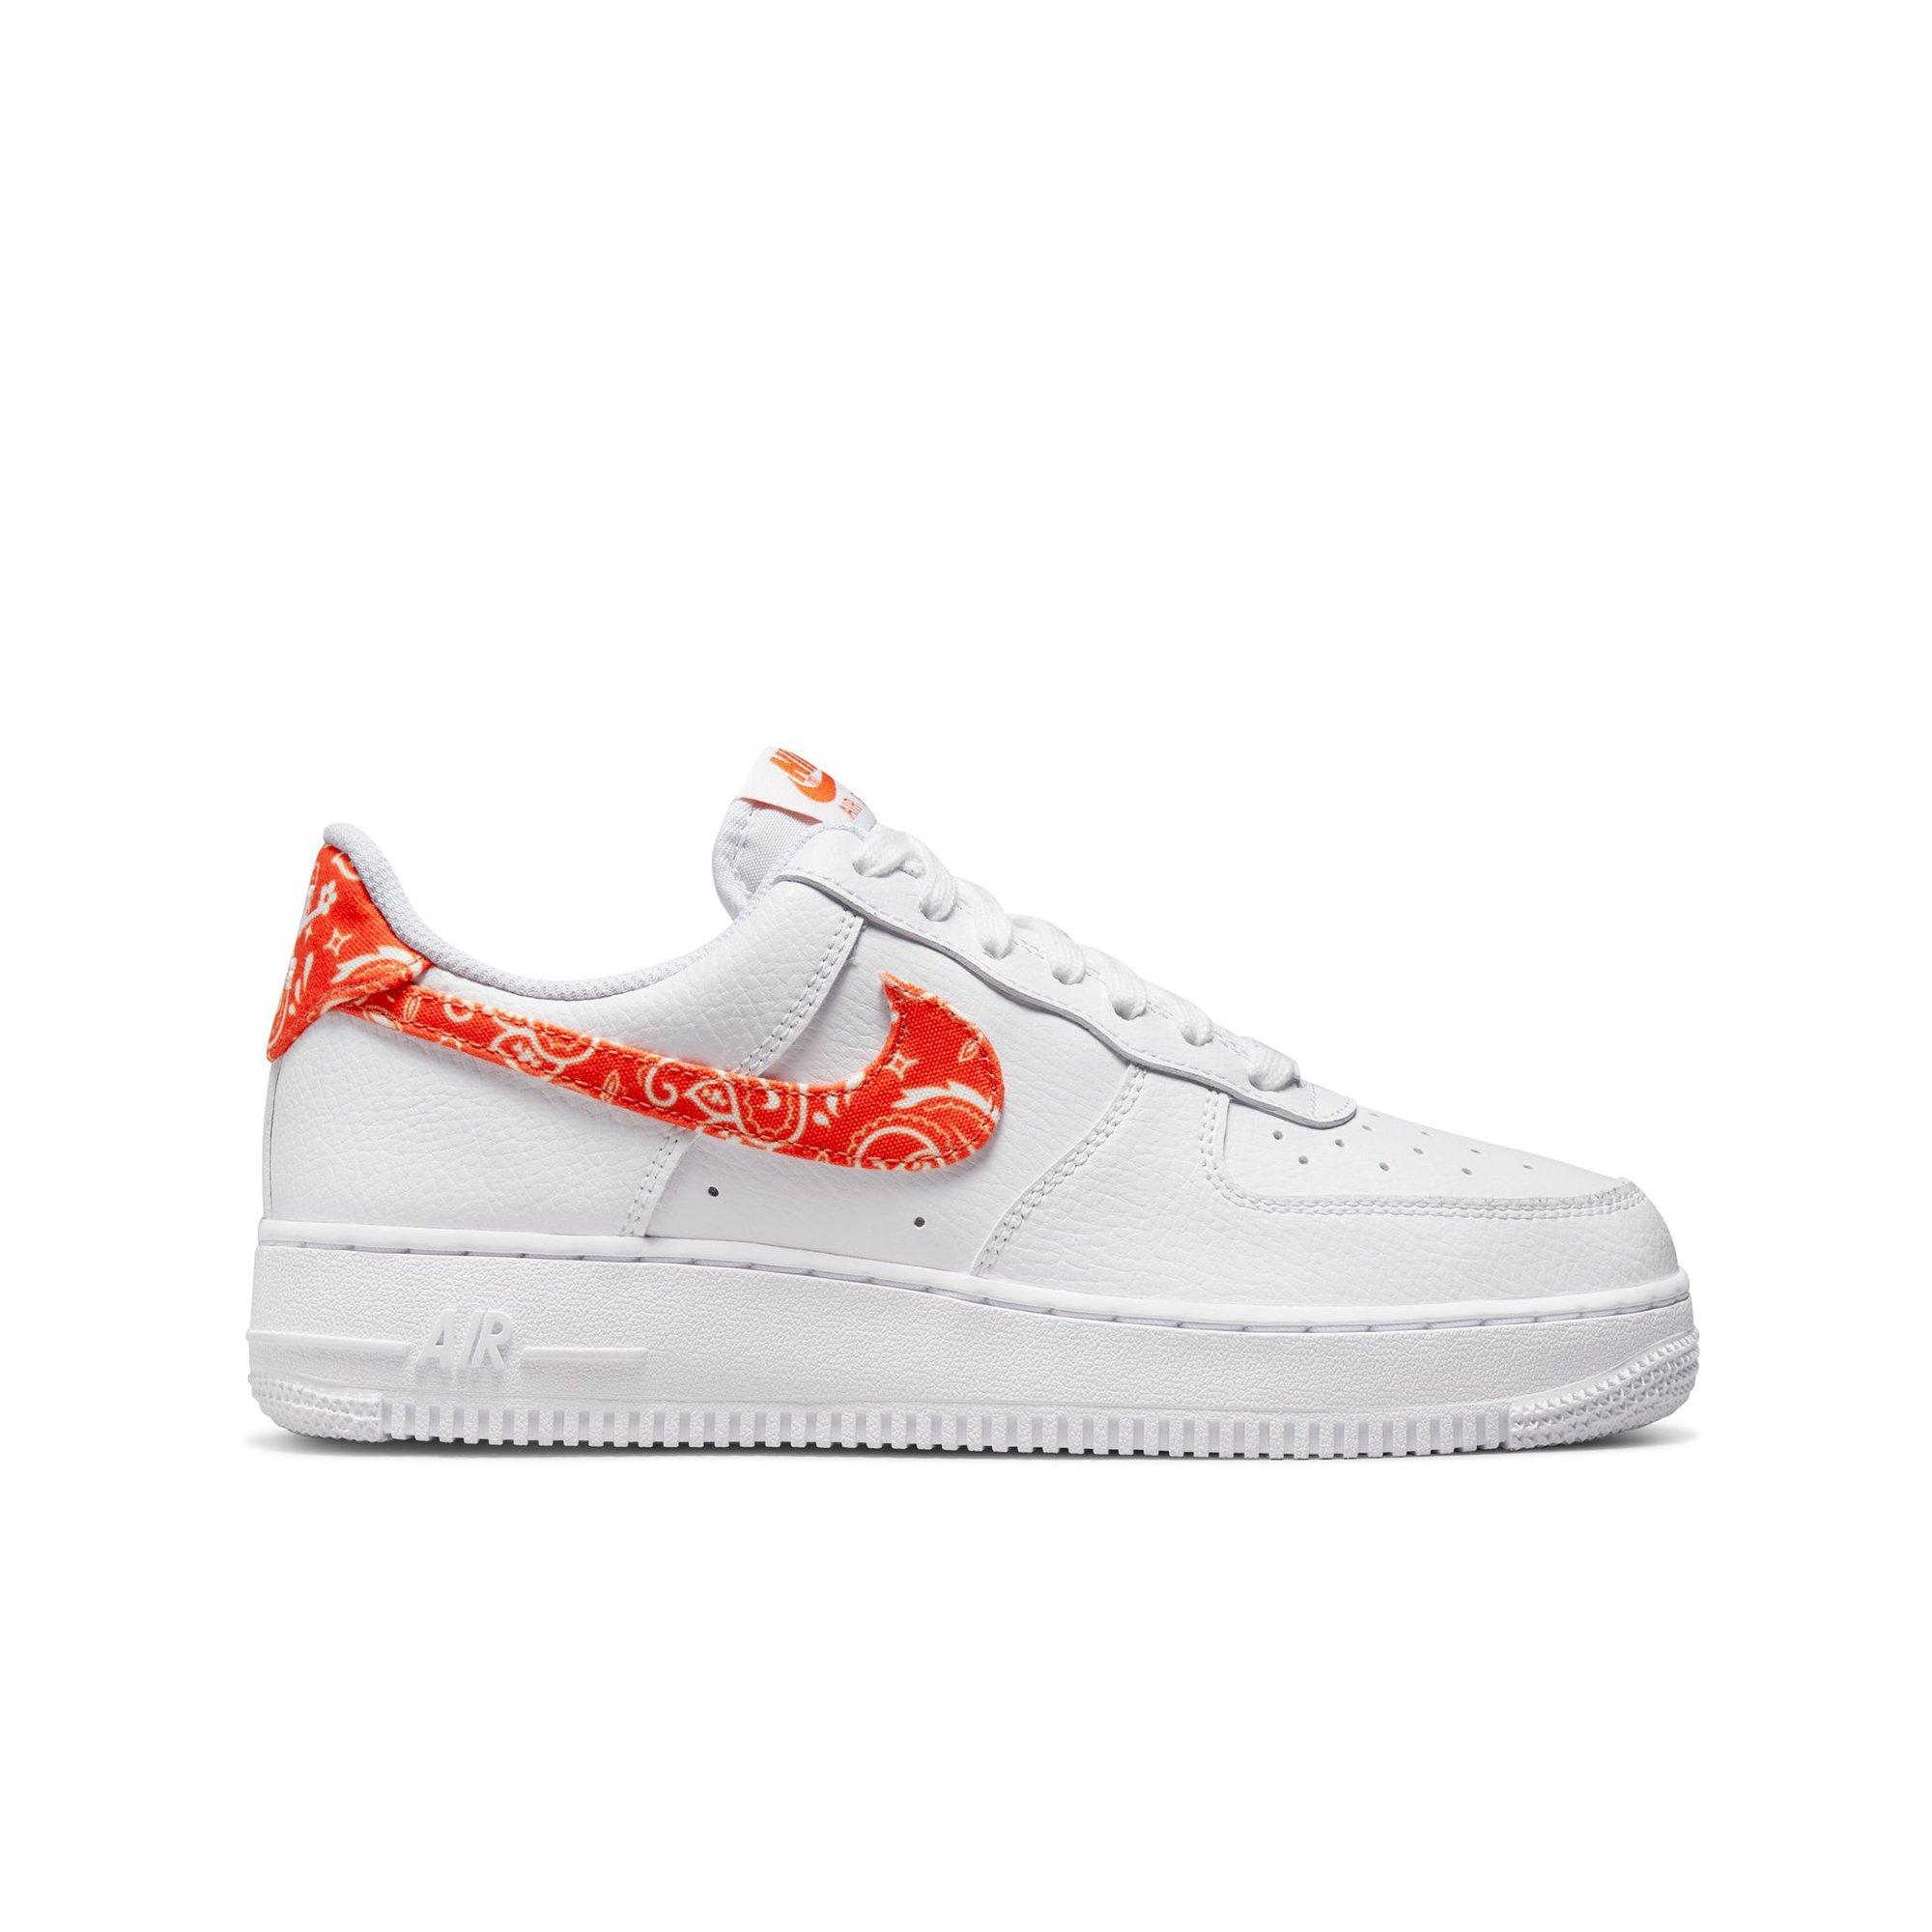 Nike Air Force One Orange Hombre Réplica AAA - Stand Shop